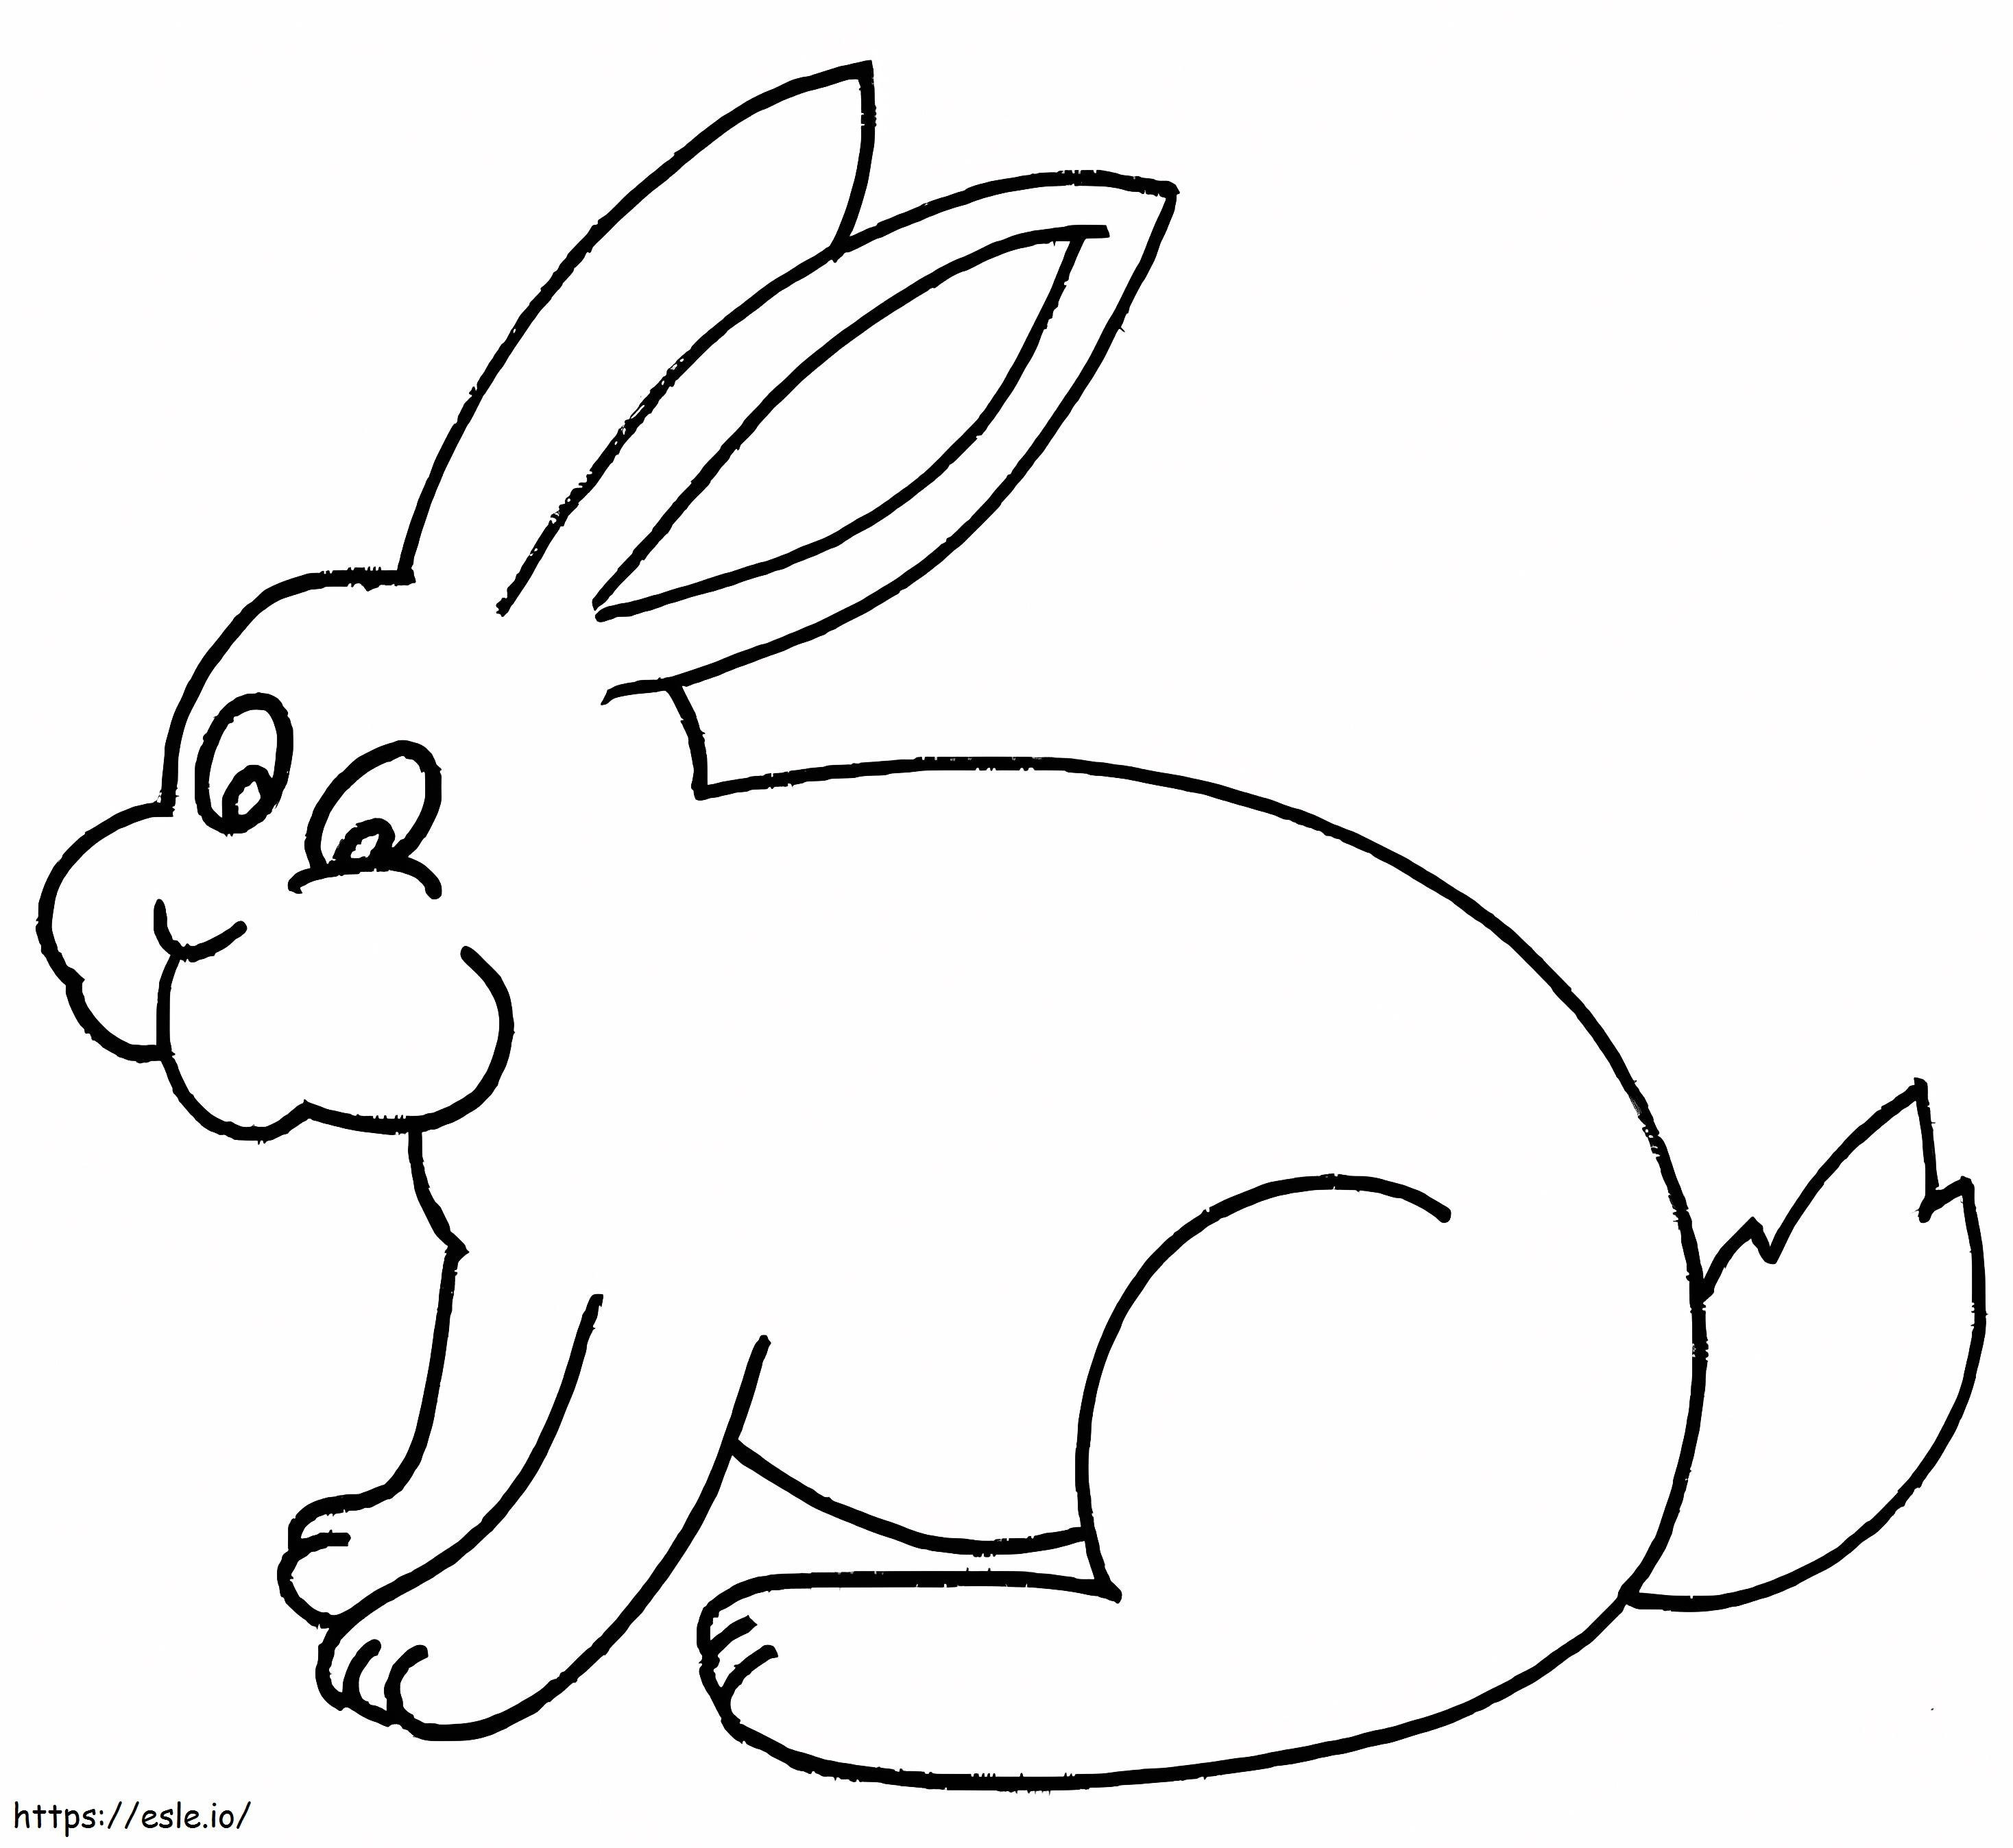 A Funny Rabbit coloring page